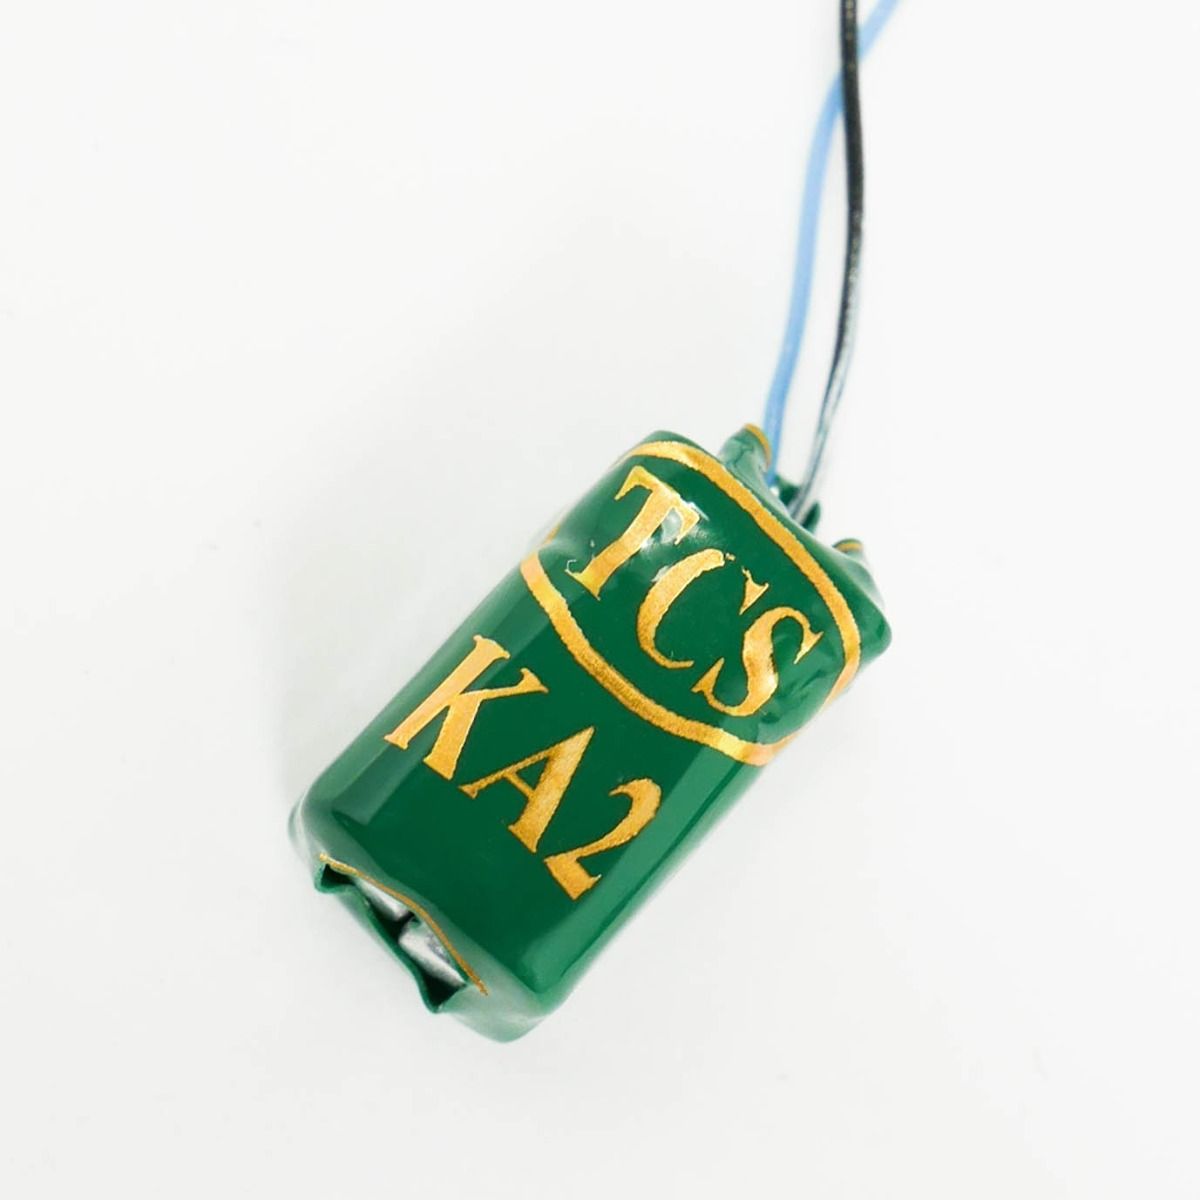 Train Control Systems TCS 2000 Ka3 Keep Alive Capacitor for sale online 